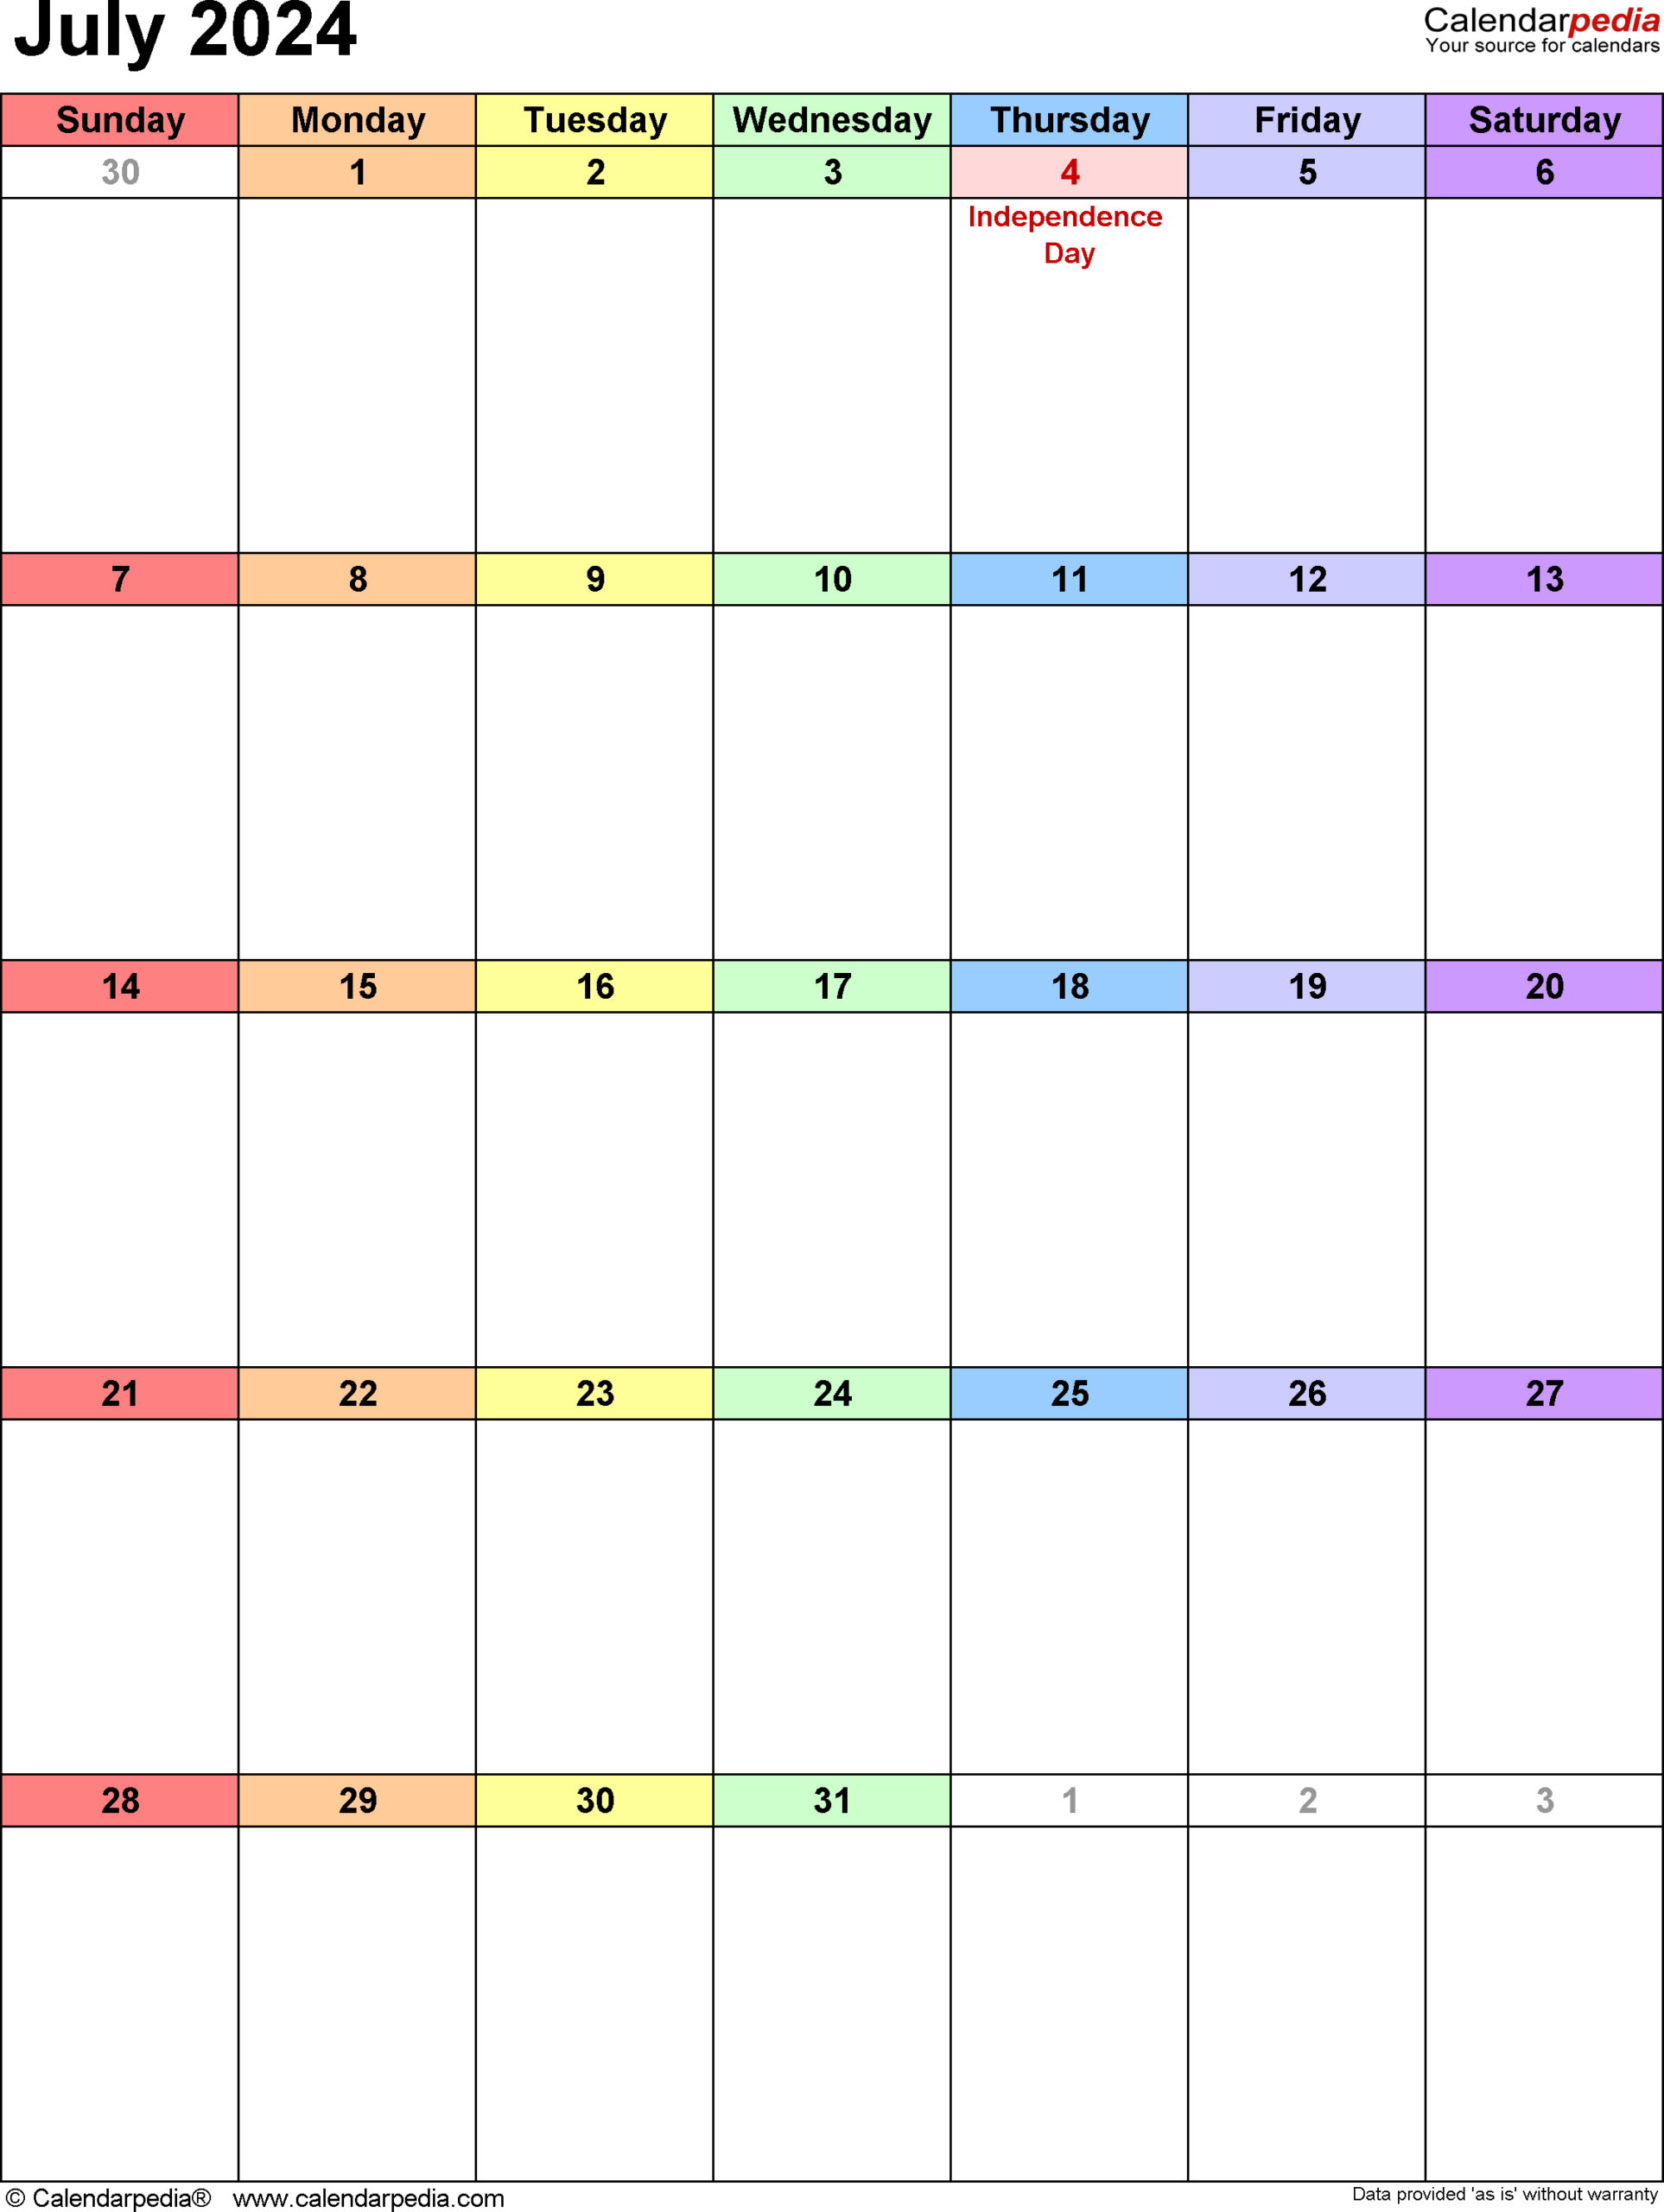 July 2024 Calendar | Templates For Word, Excel And Pdf pertaining to Editable Calendar 2024 July